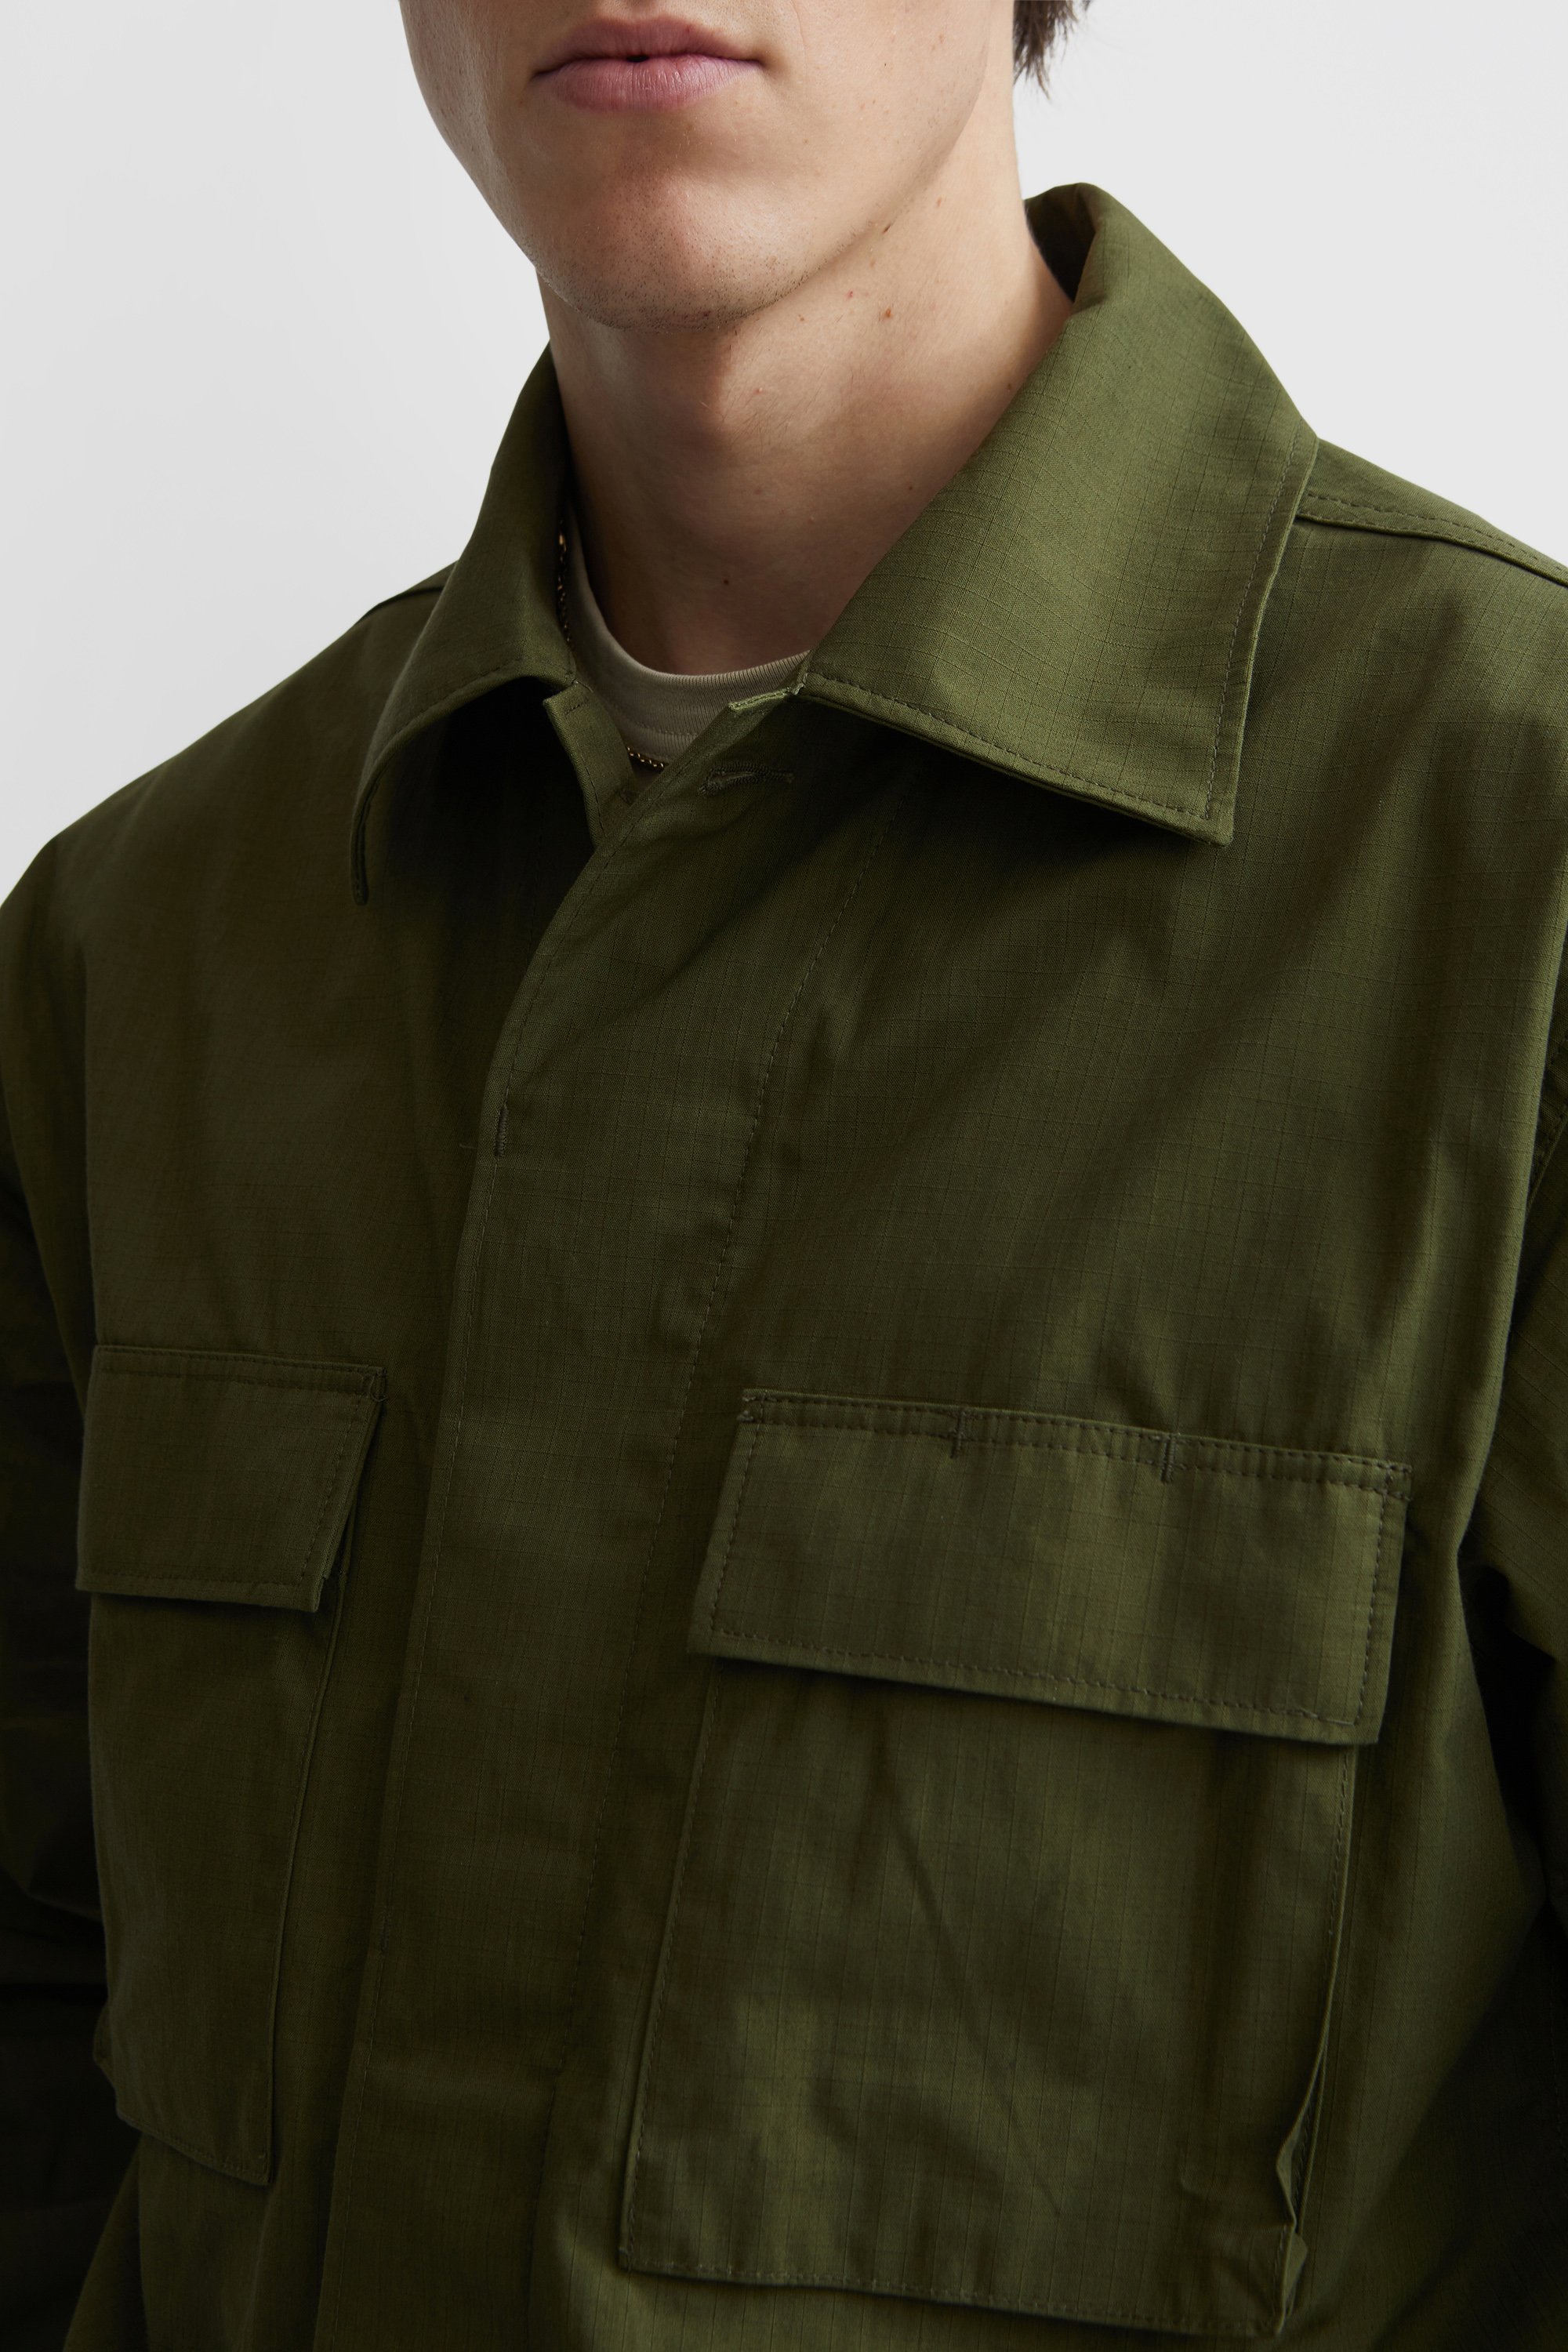 WTAPS WMILL- 01 / LS / Nyco. Ripstop Olive drab | WoodWood.com